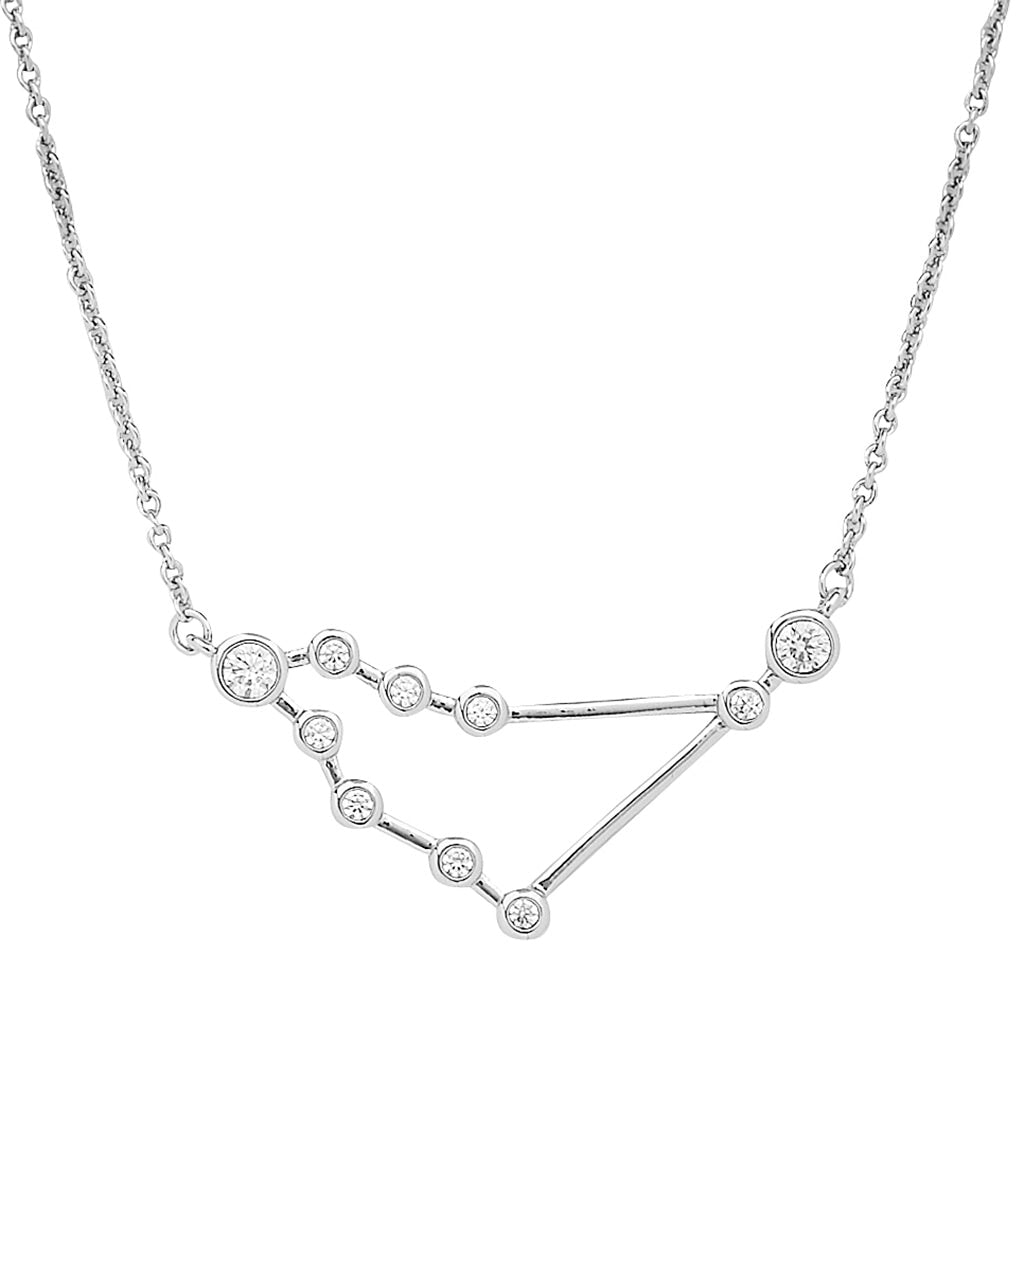 'When Stars Align' Constellation Necklace Necklace Sterling Forever Silver Capricorn (Dec 22 - Jan 19) 